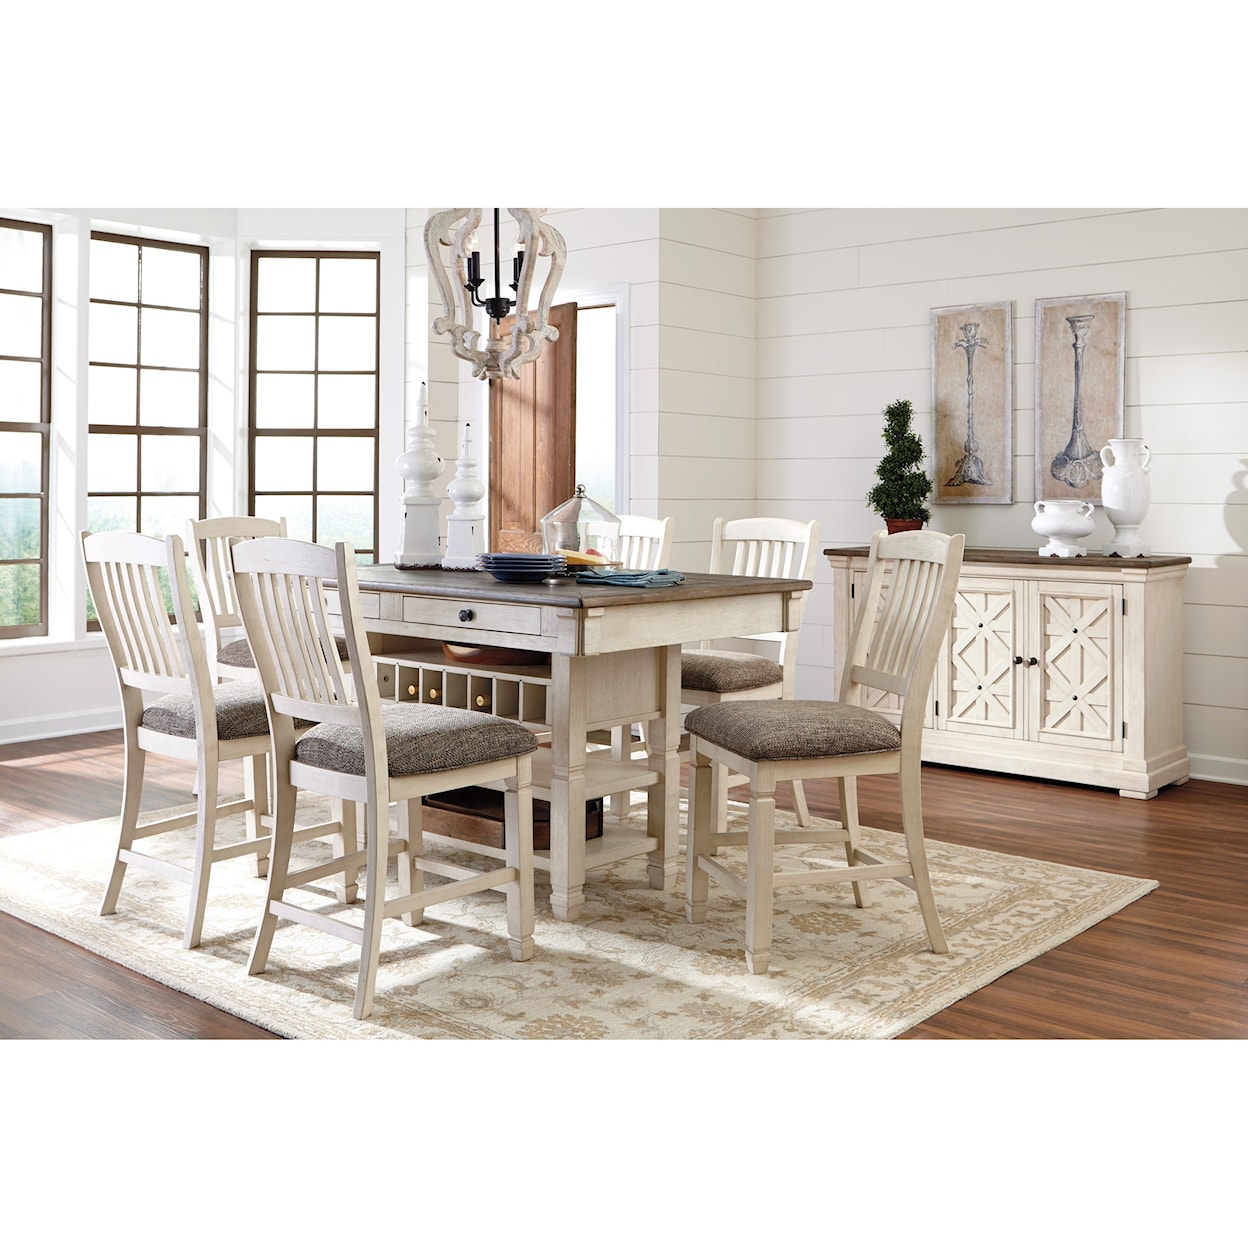 Signature Bolanburg Formal Dining Room Group